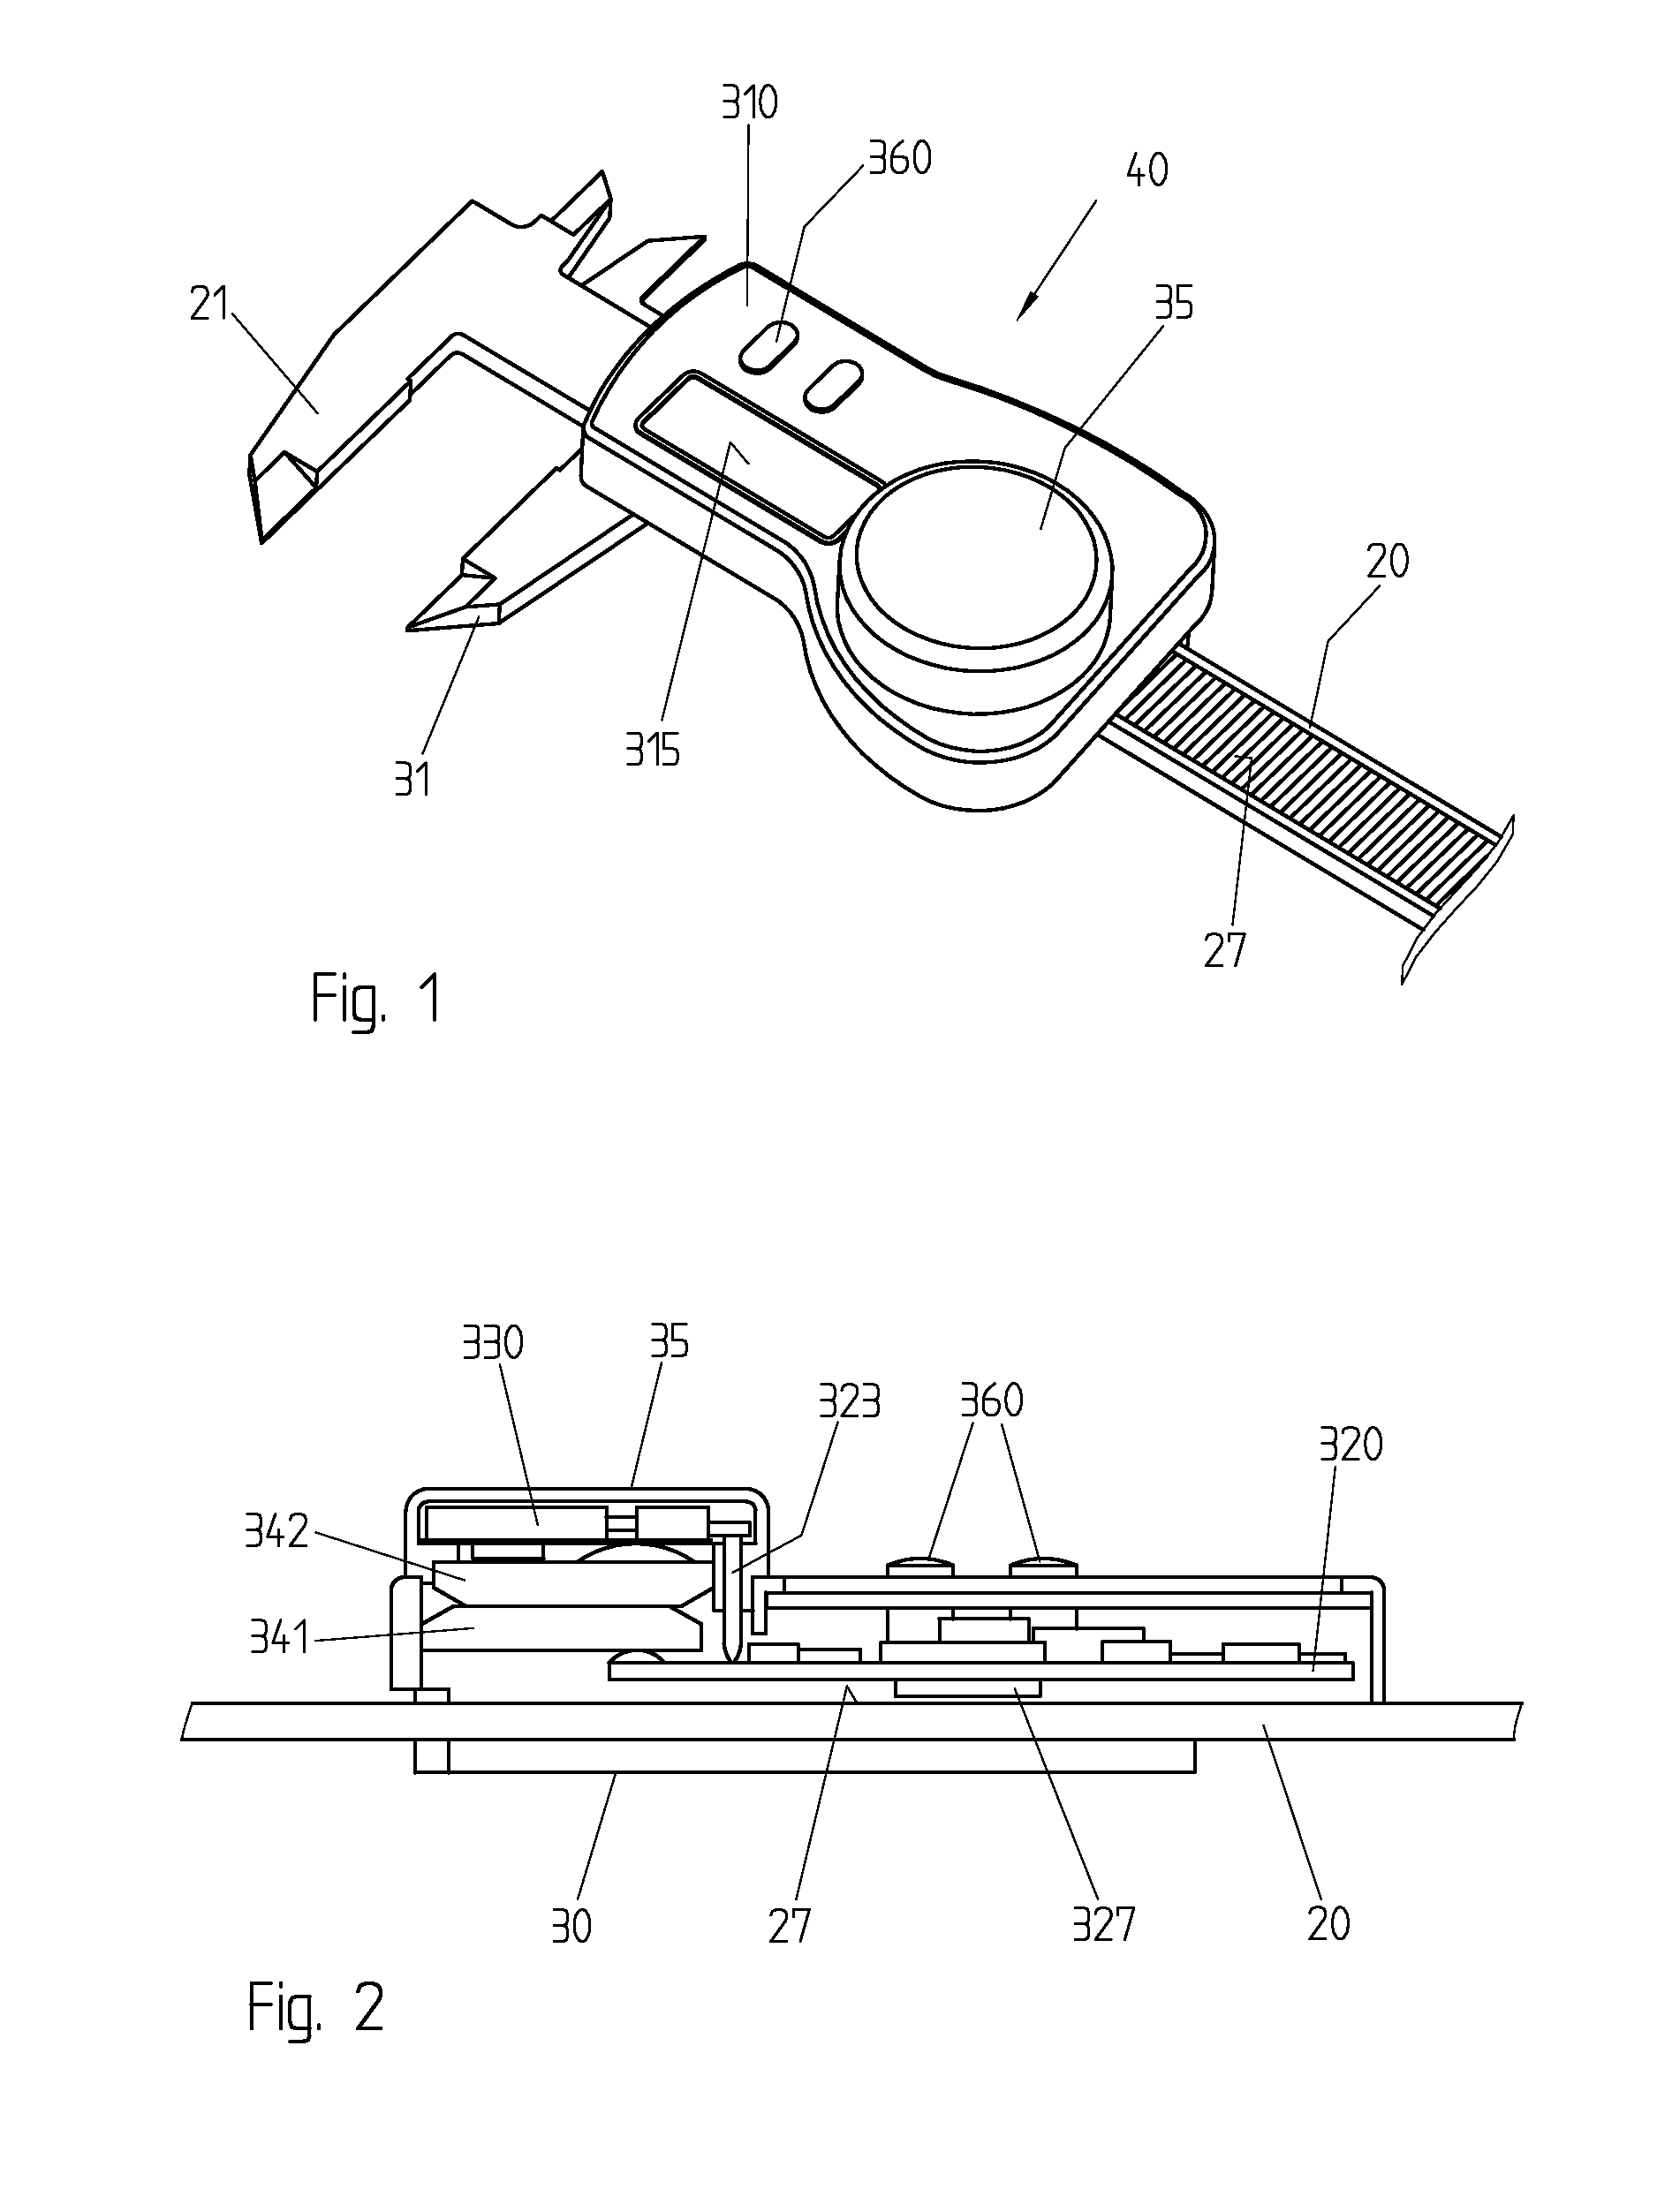 Instrument for measuring dimensions equipped with an interface and corresponding interface